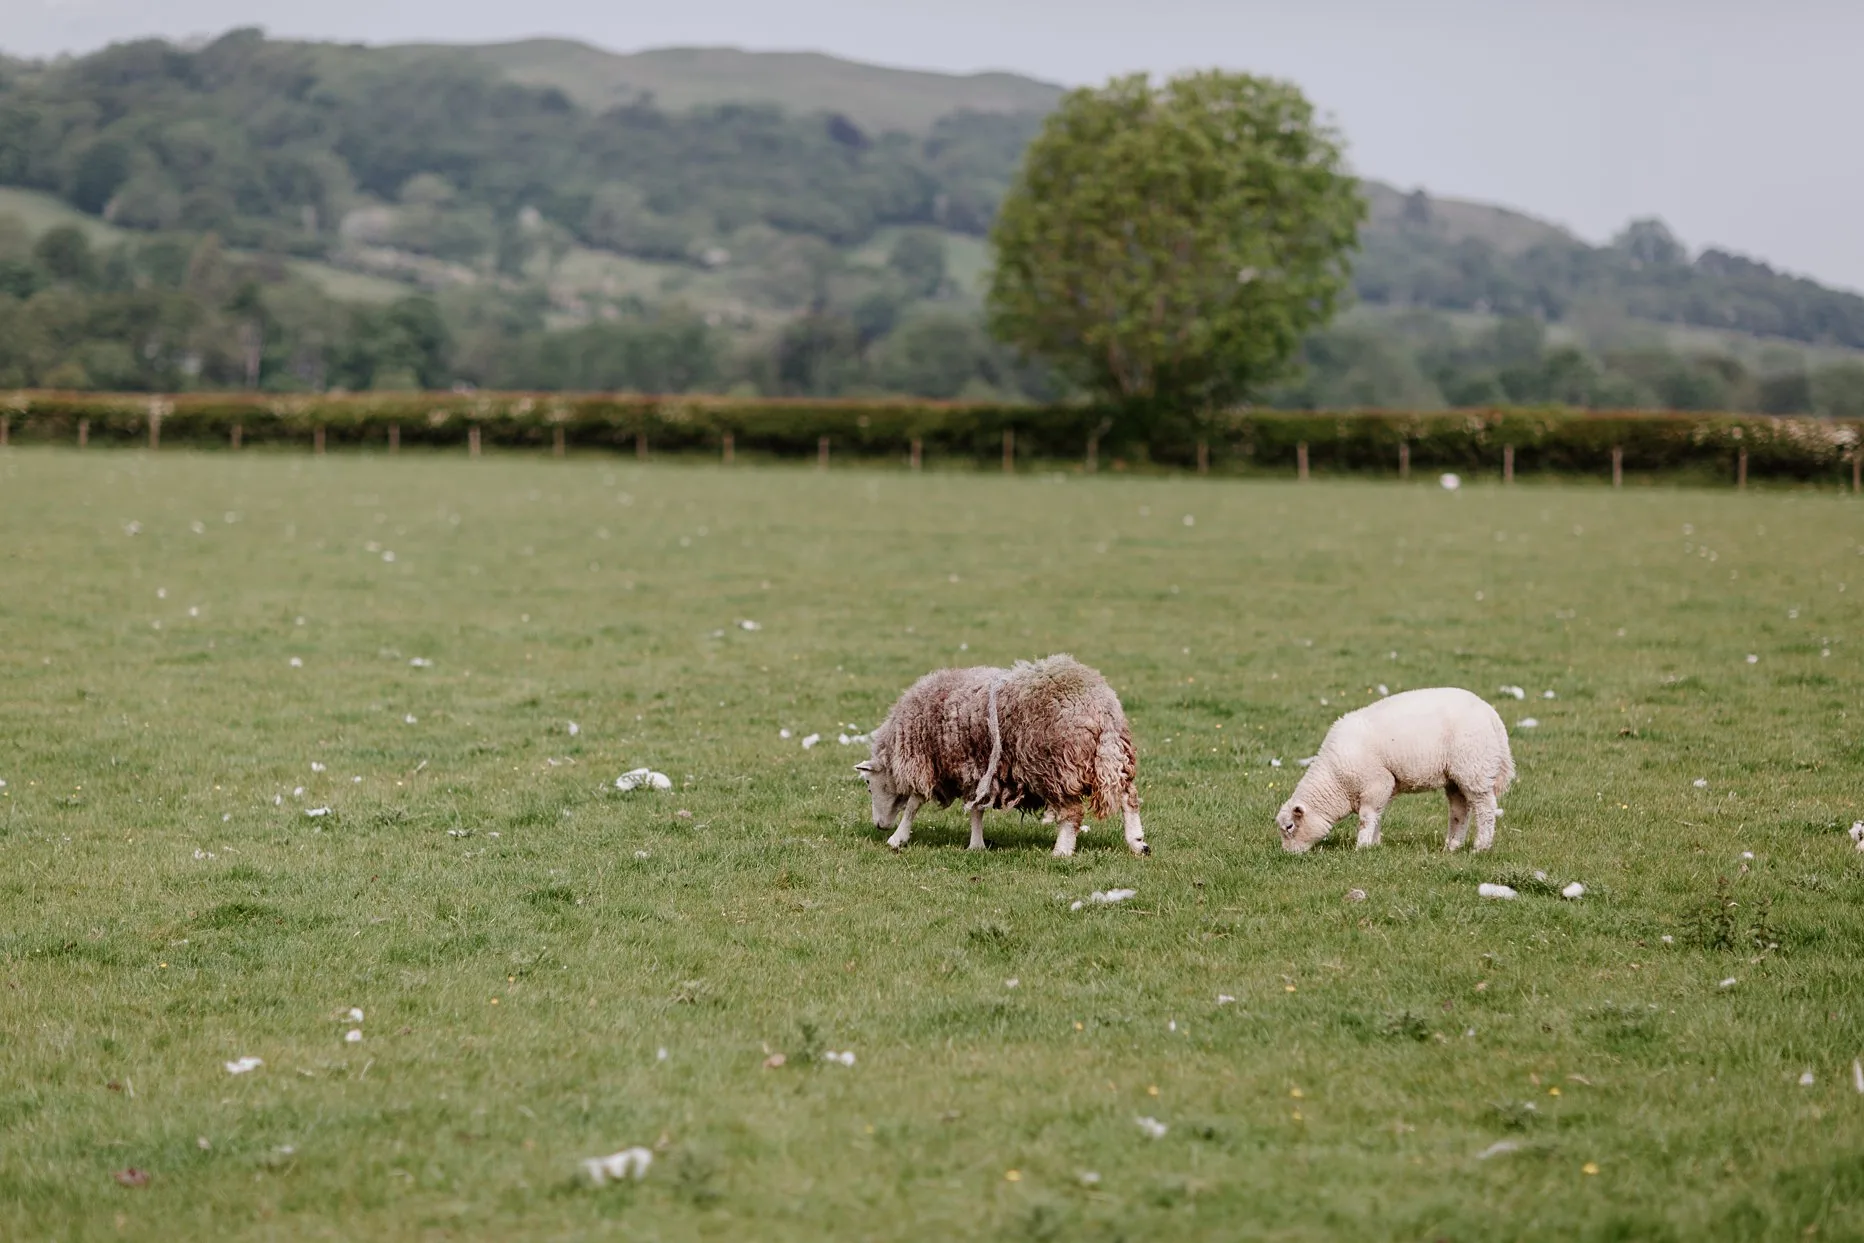 Two sheeps grazing in a field in Cockermouth, Lake District